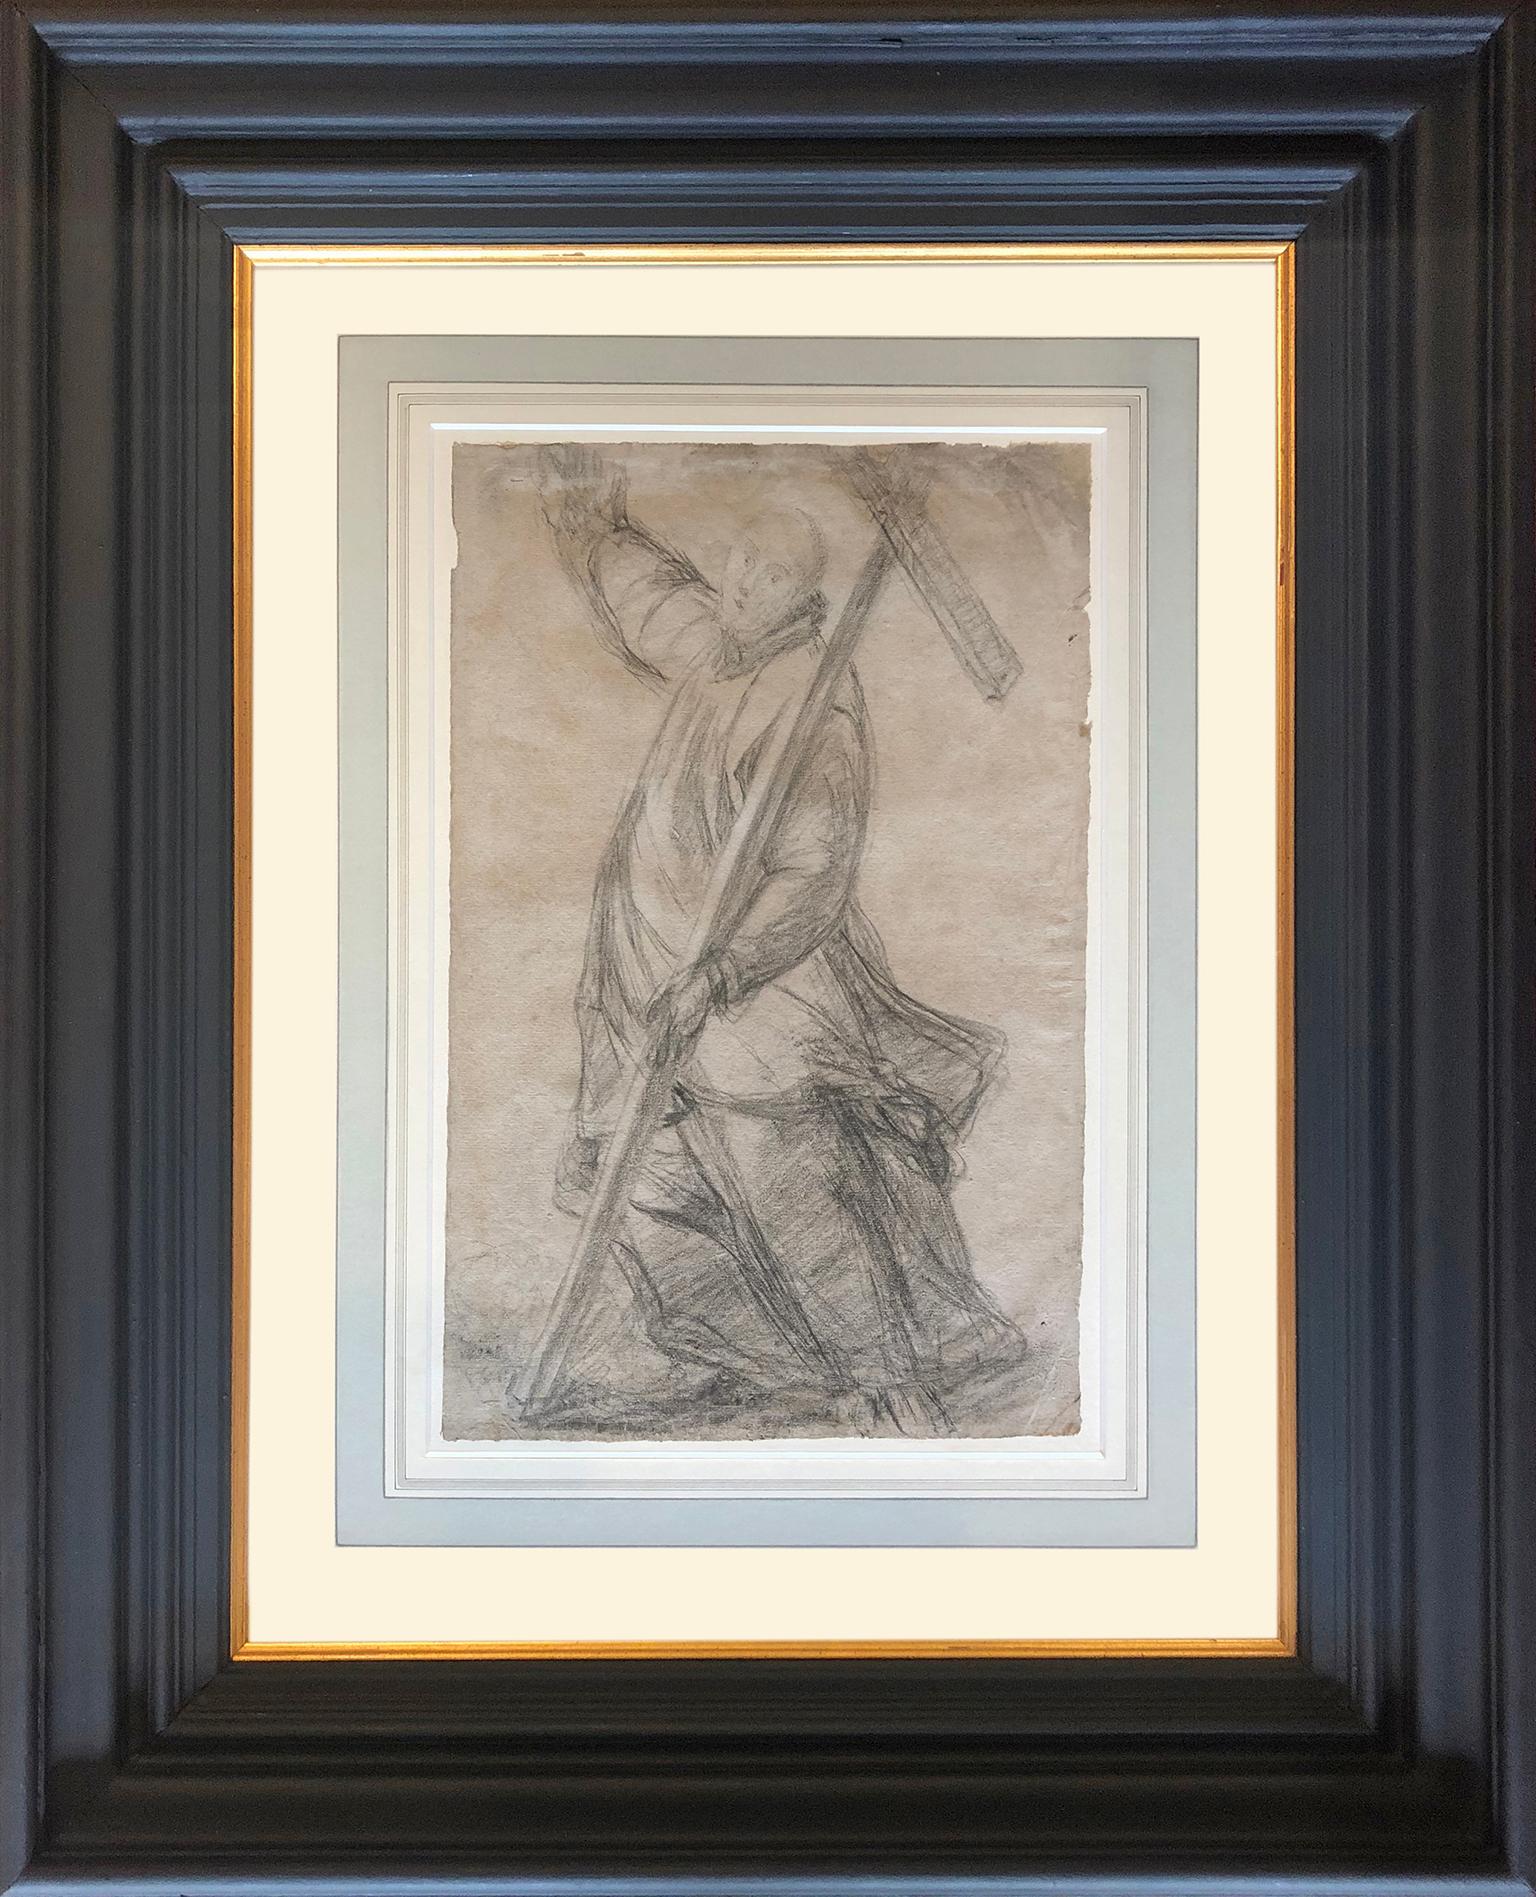 Giovanni Biliverti, (Florence 1585-1644 Florence), Saint Bernard of Clairvaux holding the Cross. 
Black chalk heightened with white chalk on light brown paper with the watermark of a crowned eagle bearing initials VC.
A counter-proof of a figure in